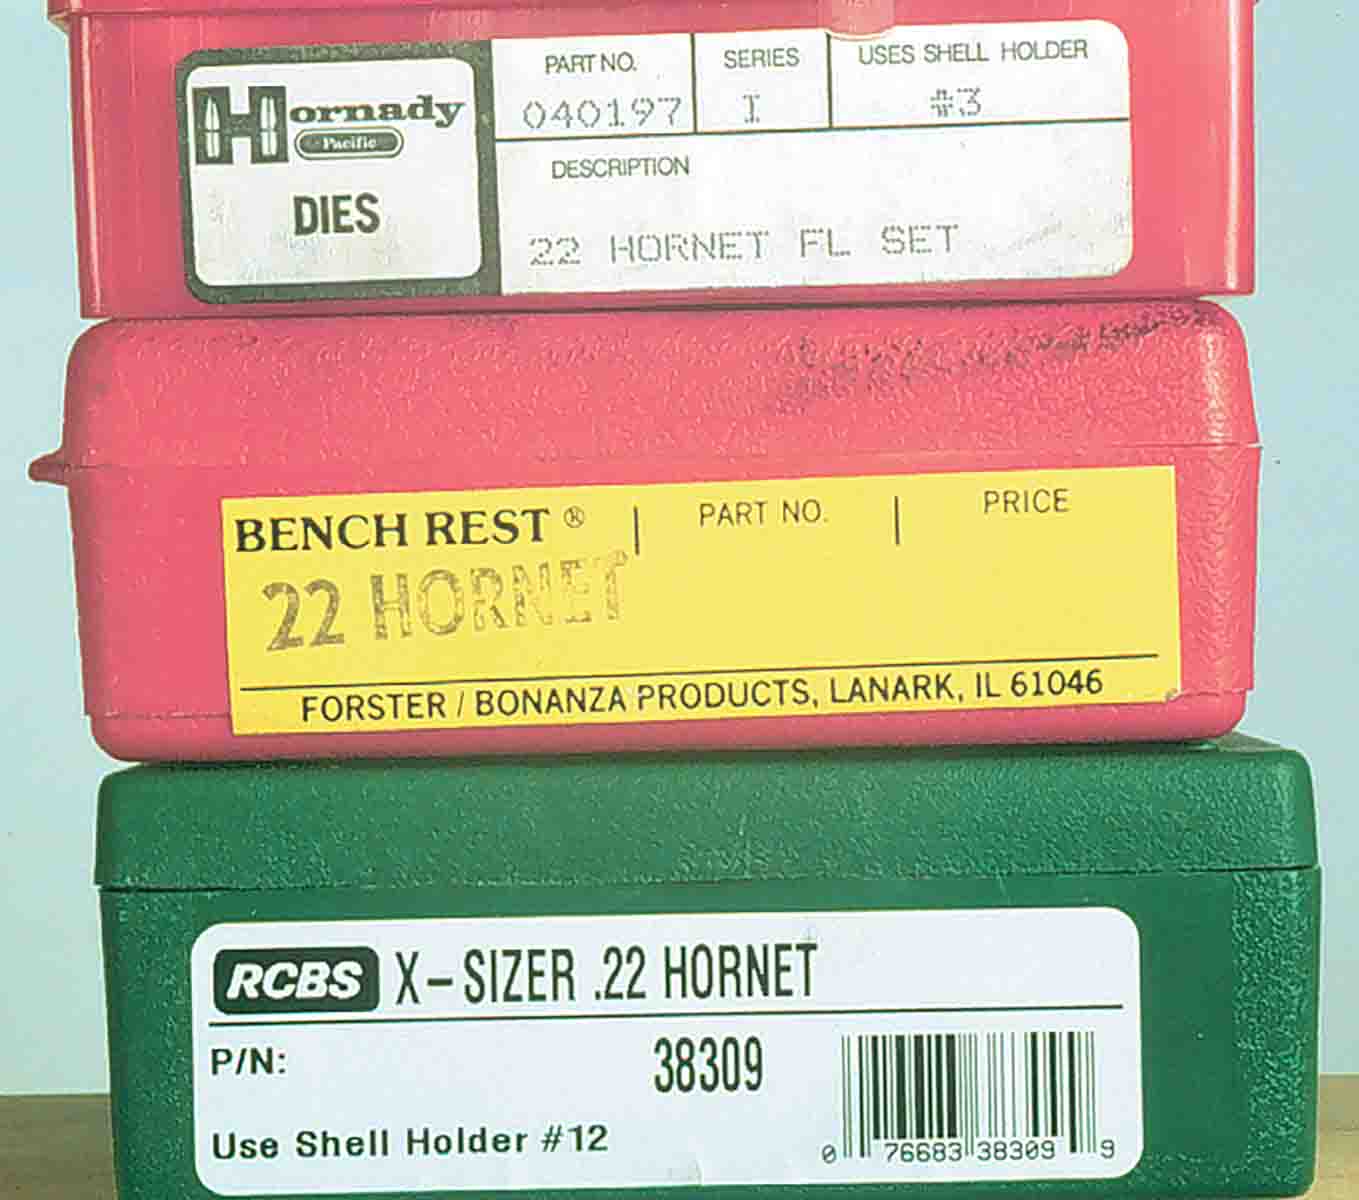 Ross used a variety of Hornet dies. The Forster Benchrest seater reduces bullet runout. The RCBS X die eliminates case growth and also rules out the often necessary neck sizing.